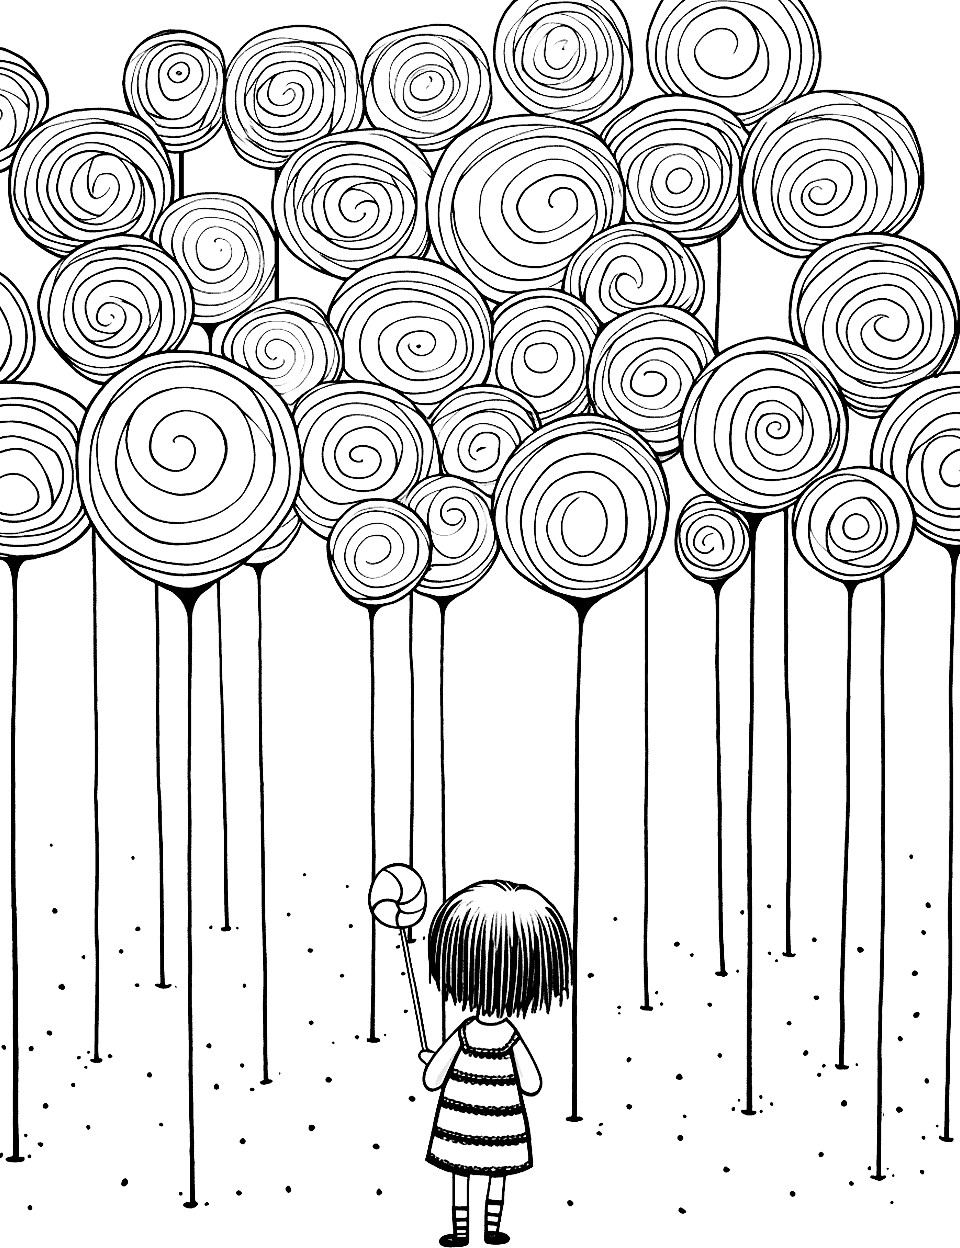 Lollipop Forest Exploration Candy Coloring Page - A child wanders through a forest where the trees are giant lollipops of various colors.